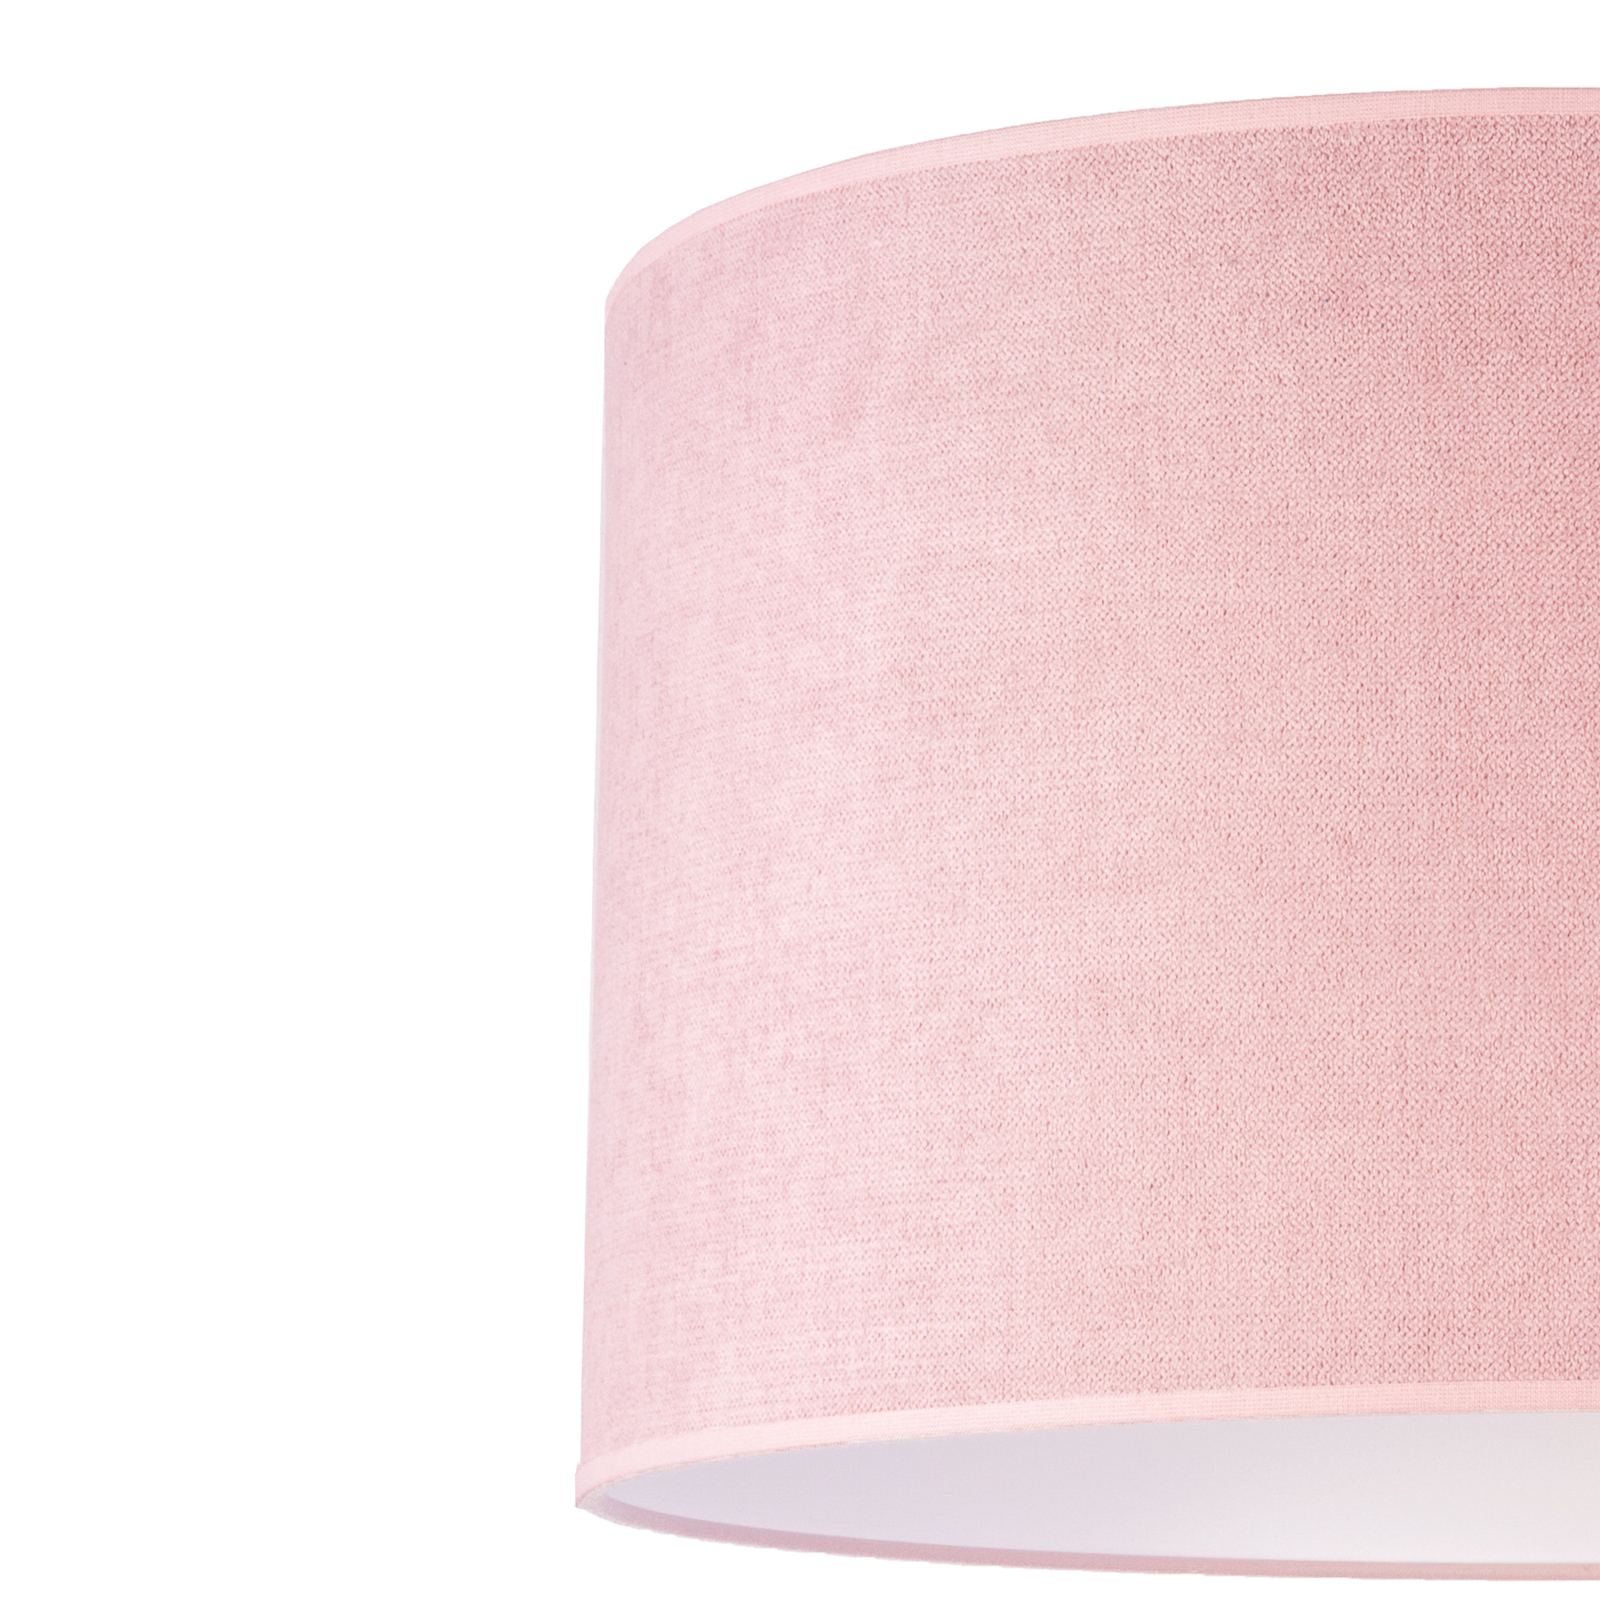 Pastell Roller table lamp height 50cm pink